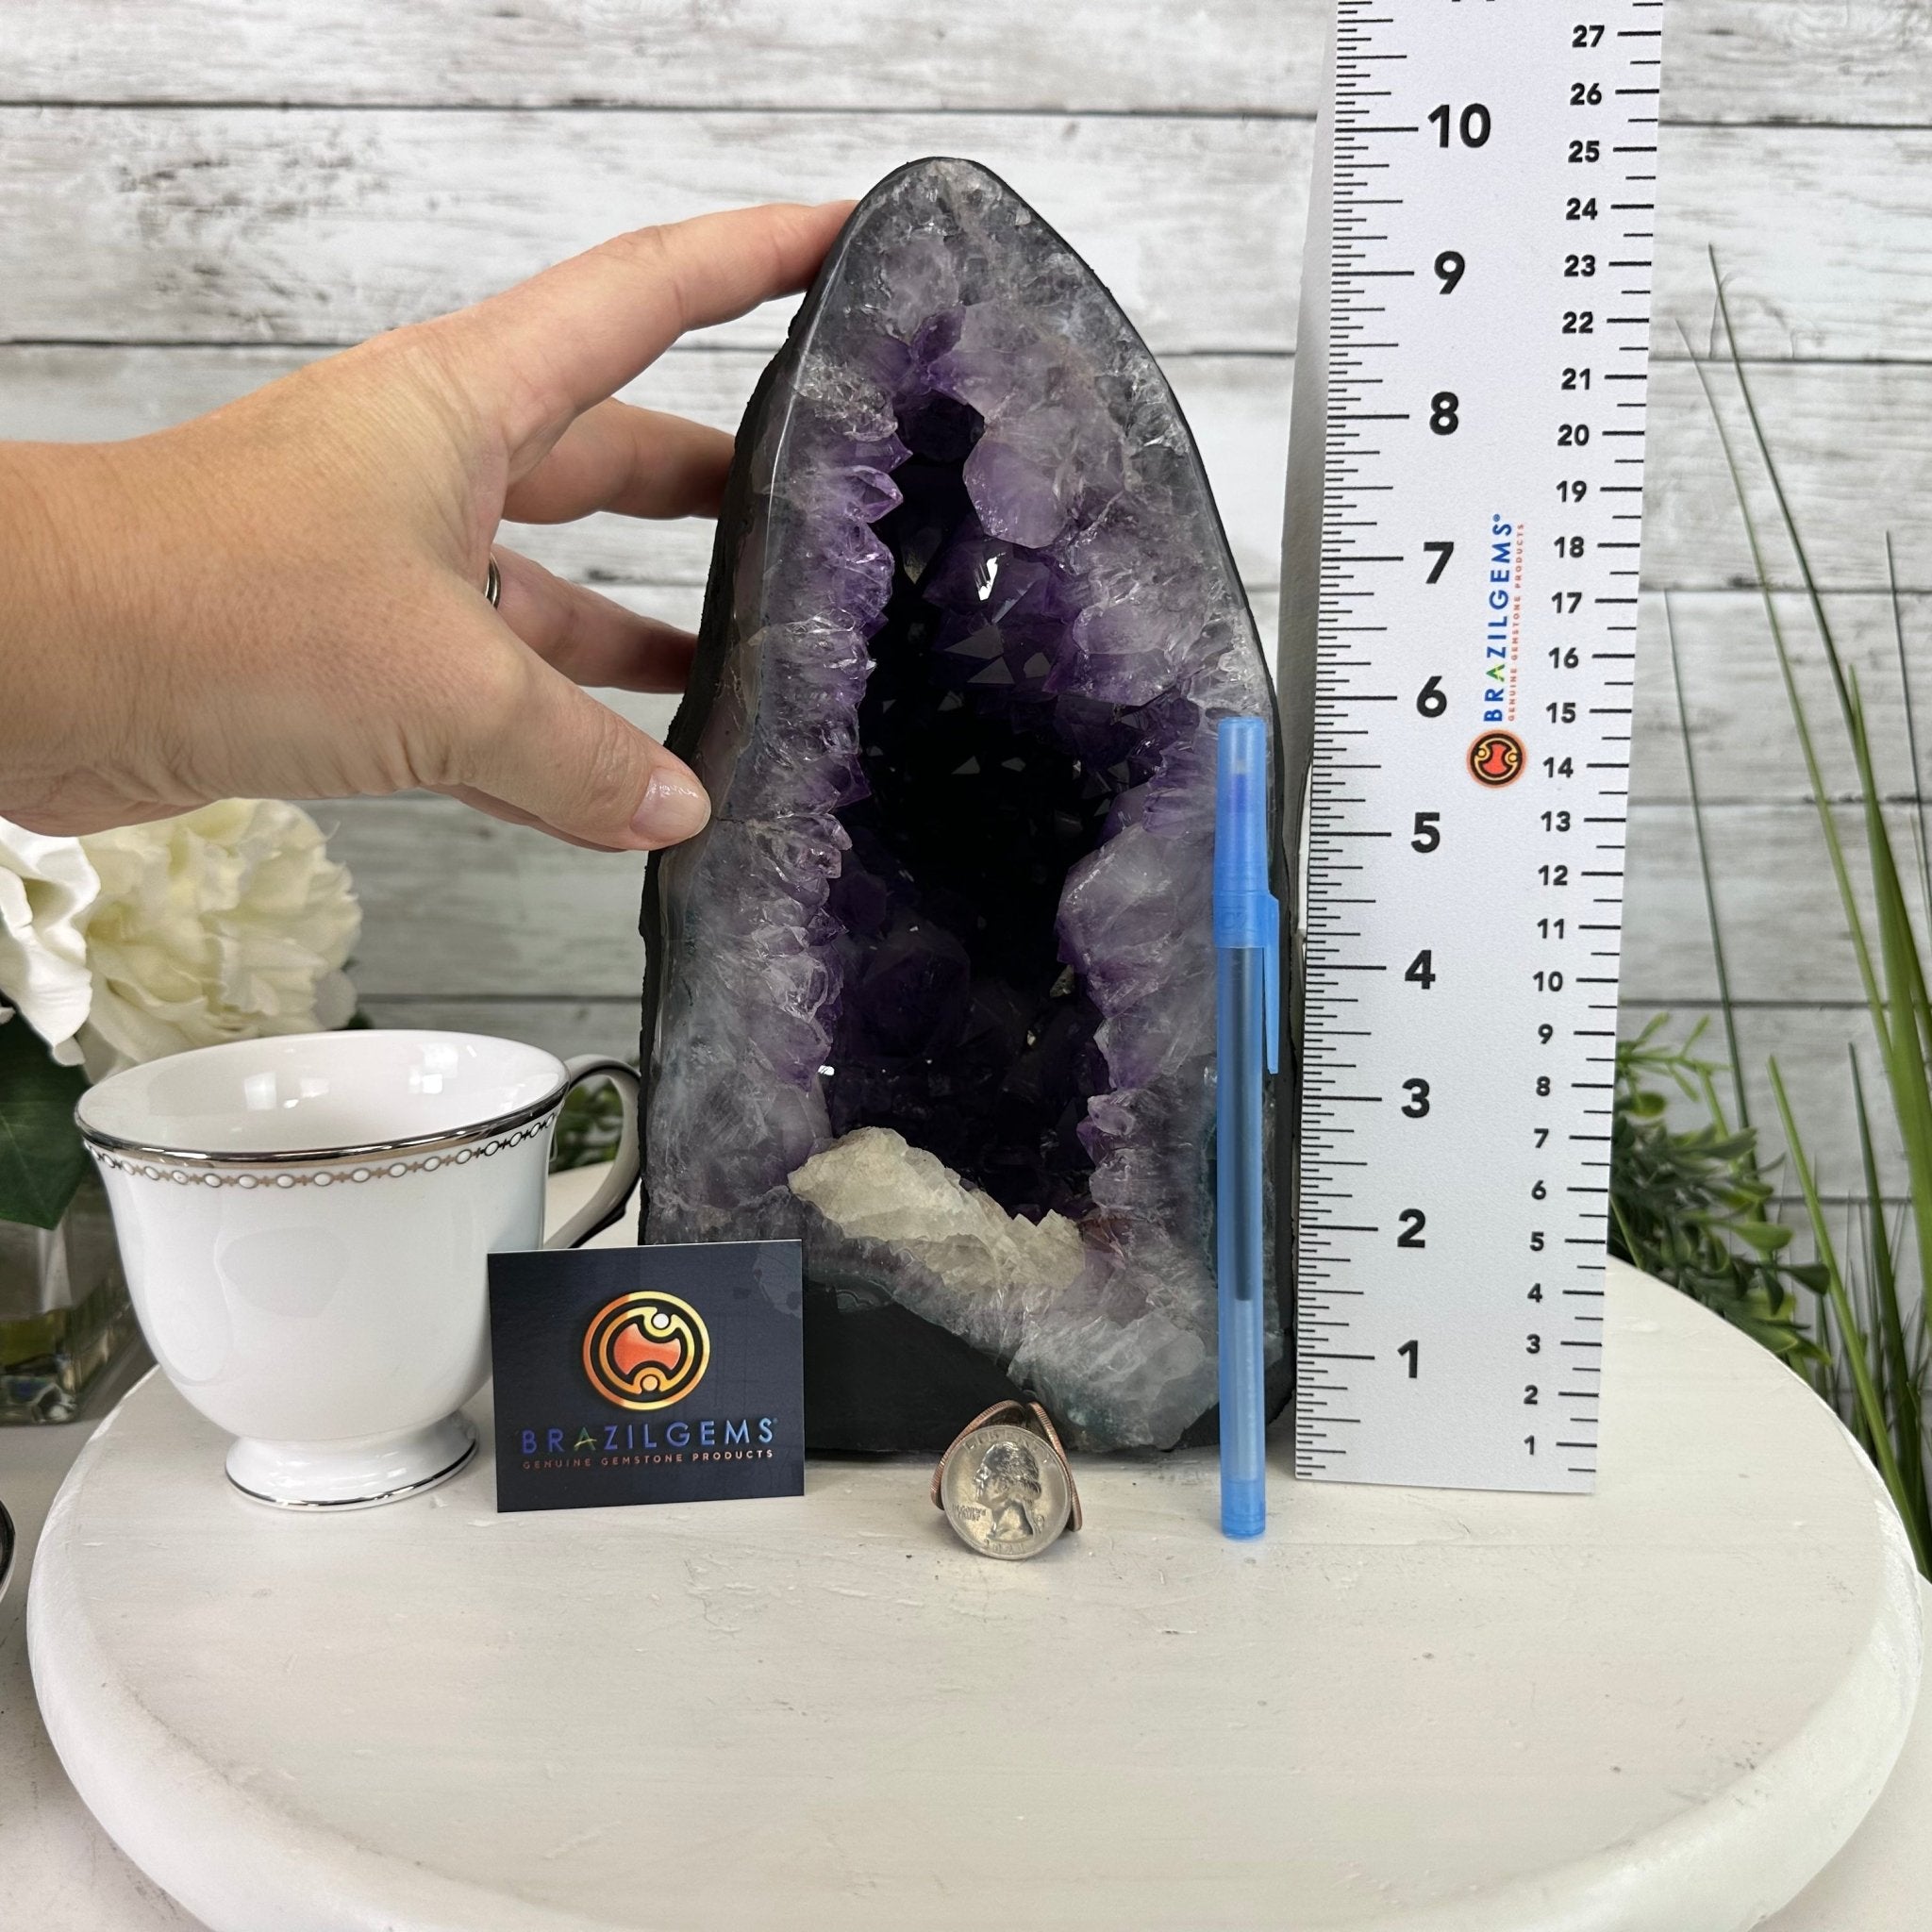 Super Quality Brazilian Amethyst Cathedral, 13.6 lbs & 9.6" Tall, Model #5601-0963 by Brazil Gems - Brazil GemsBrazil GemsSuper Quality Brazilian Amethyst Cathedral, 13.6 lbs & 9.6" Tall, Model #5601-0963 by Brazil GemsCathedrals5601-0963